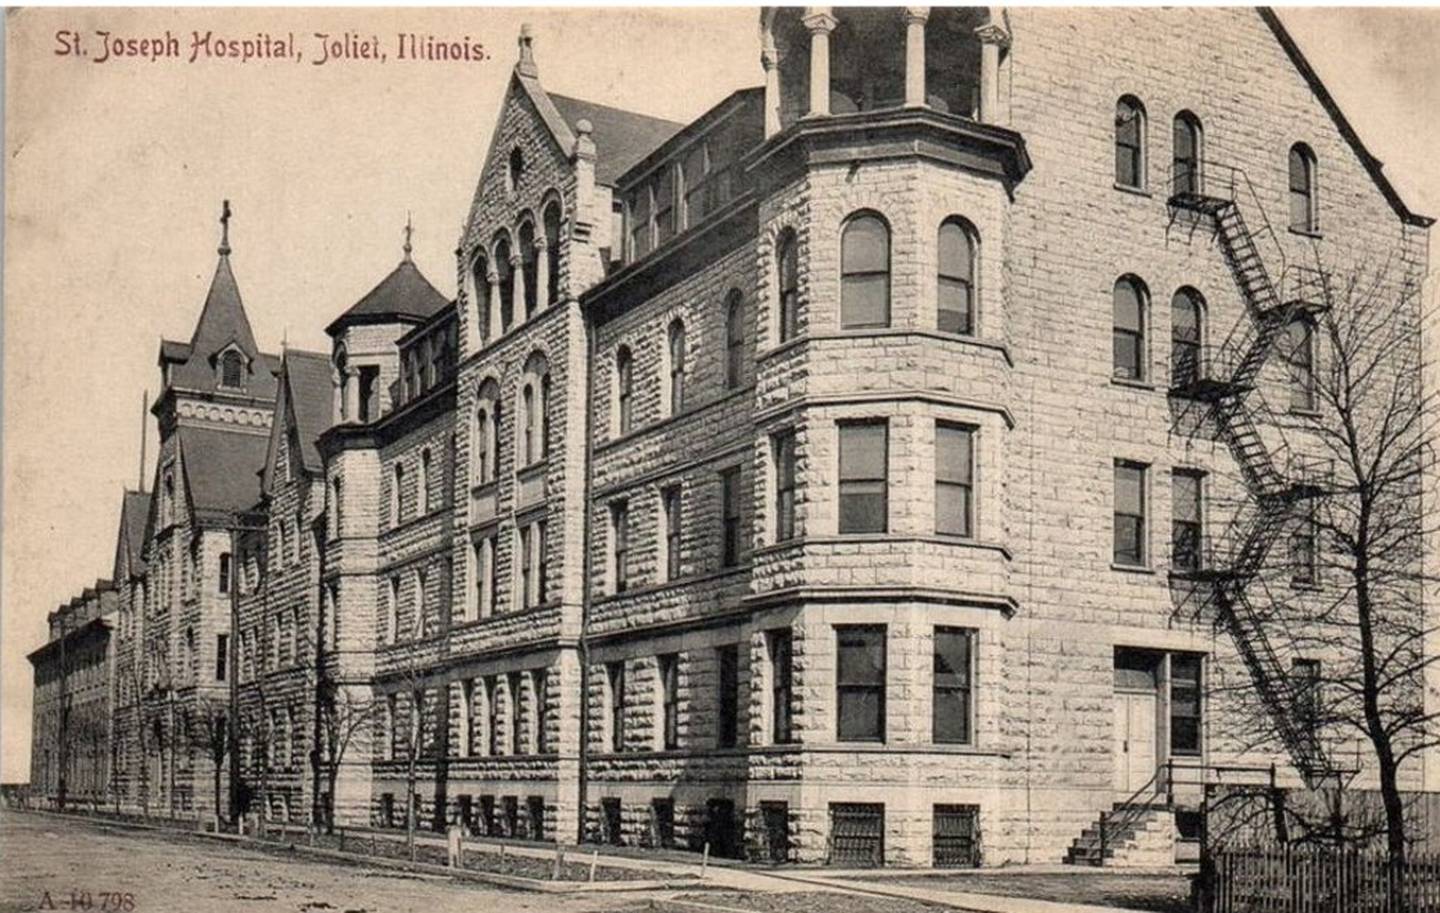 Pictured is the original Ascension Saint Joseph – Joliet hospital building as it existed in 1882.